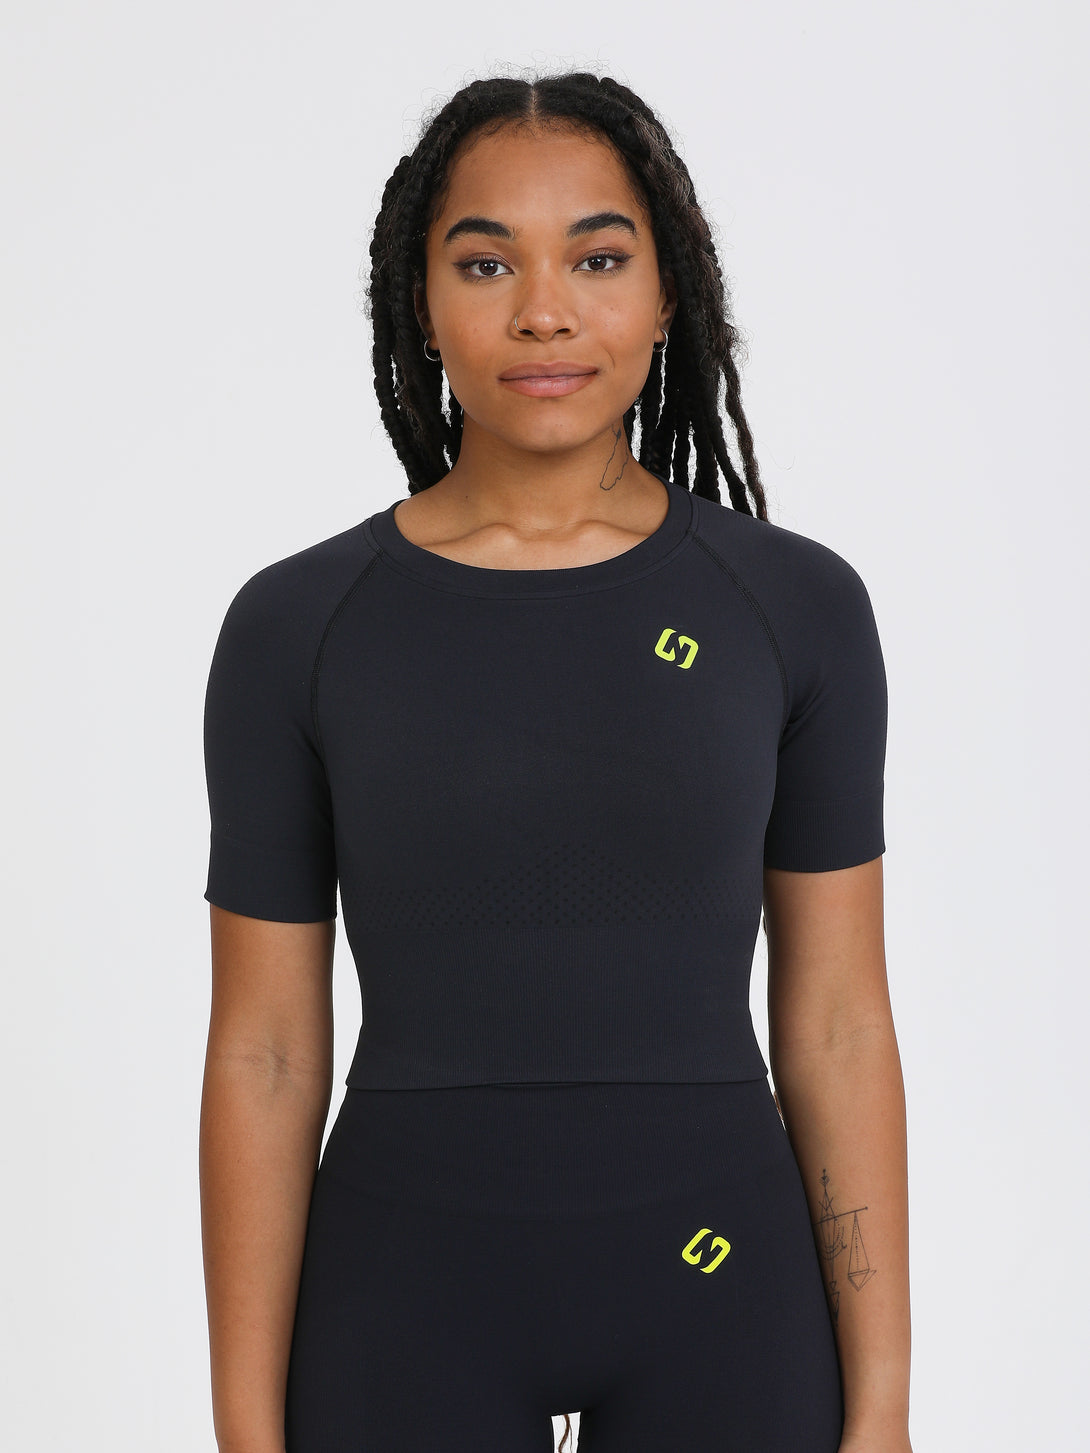 A Woman Wearing Black Color The Main Short Sleeve Crop Top